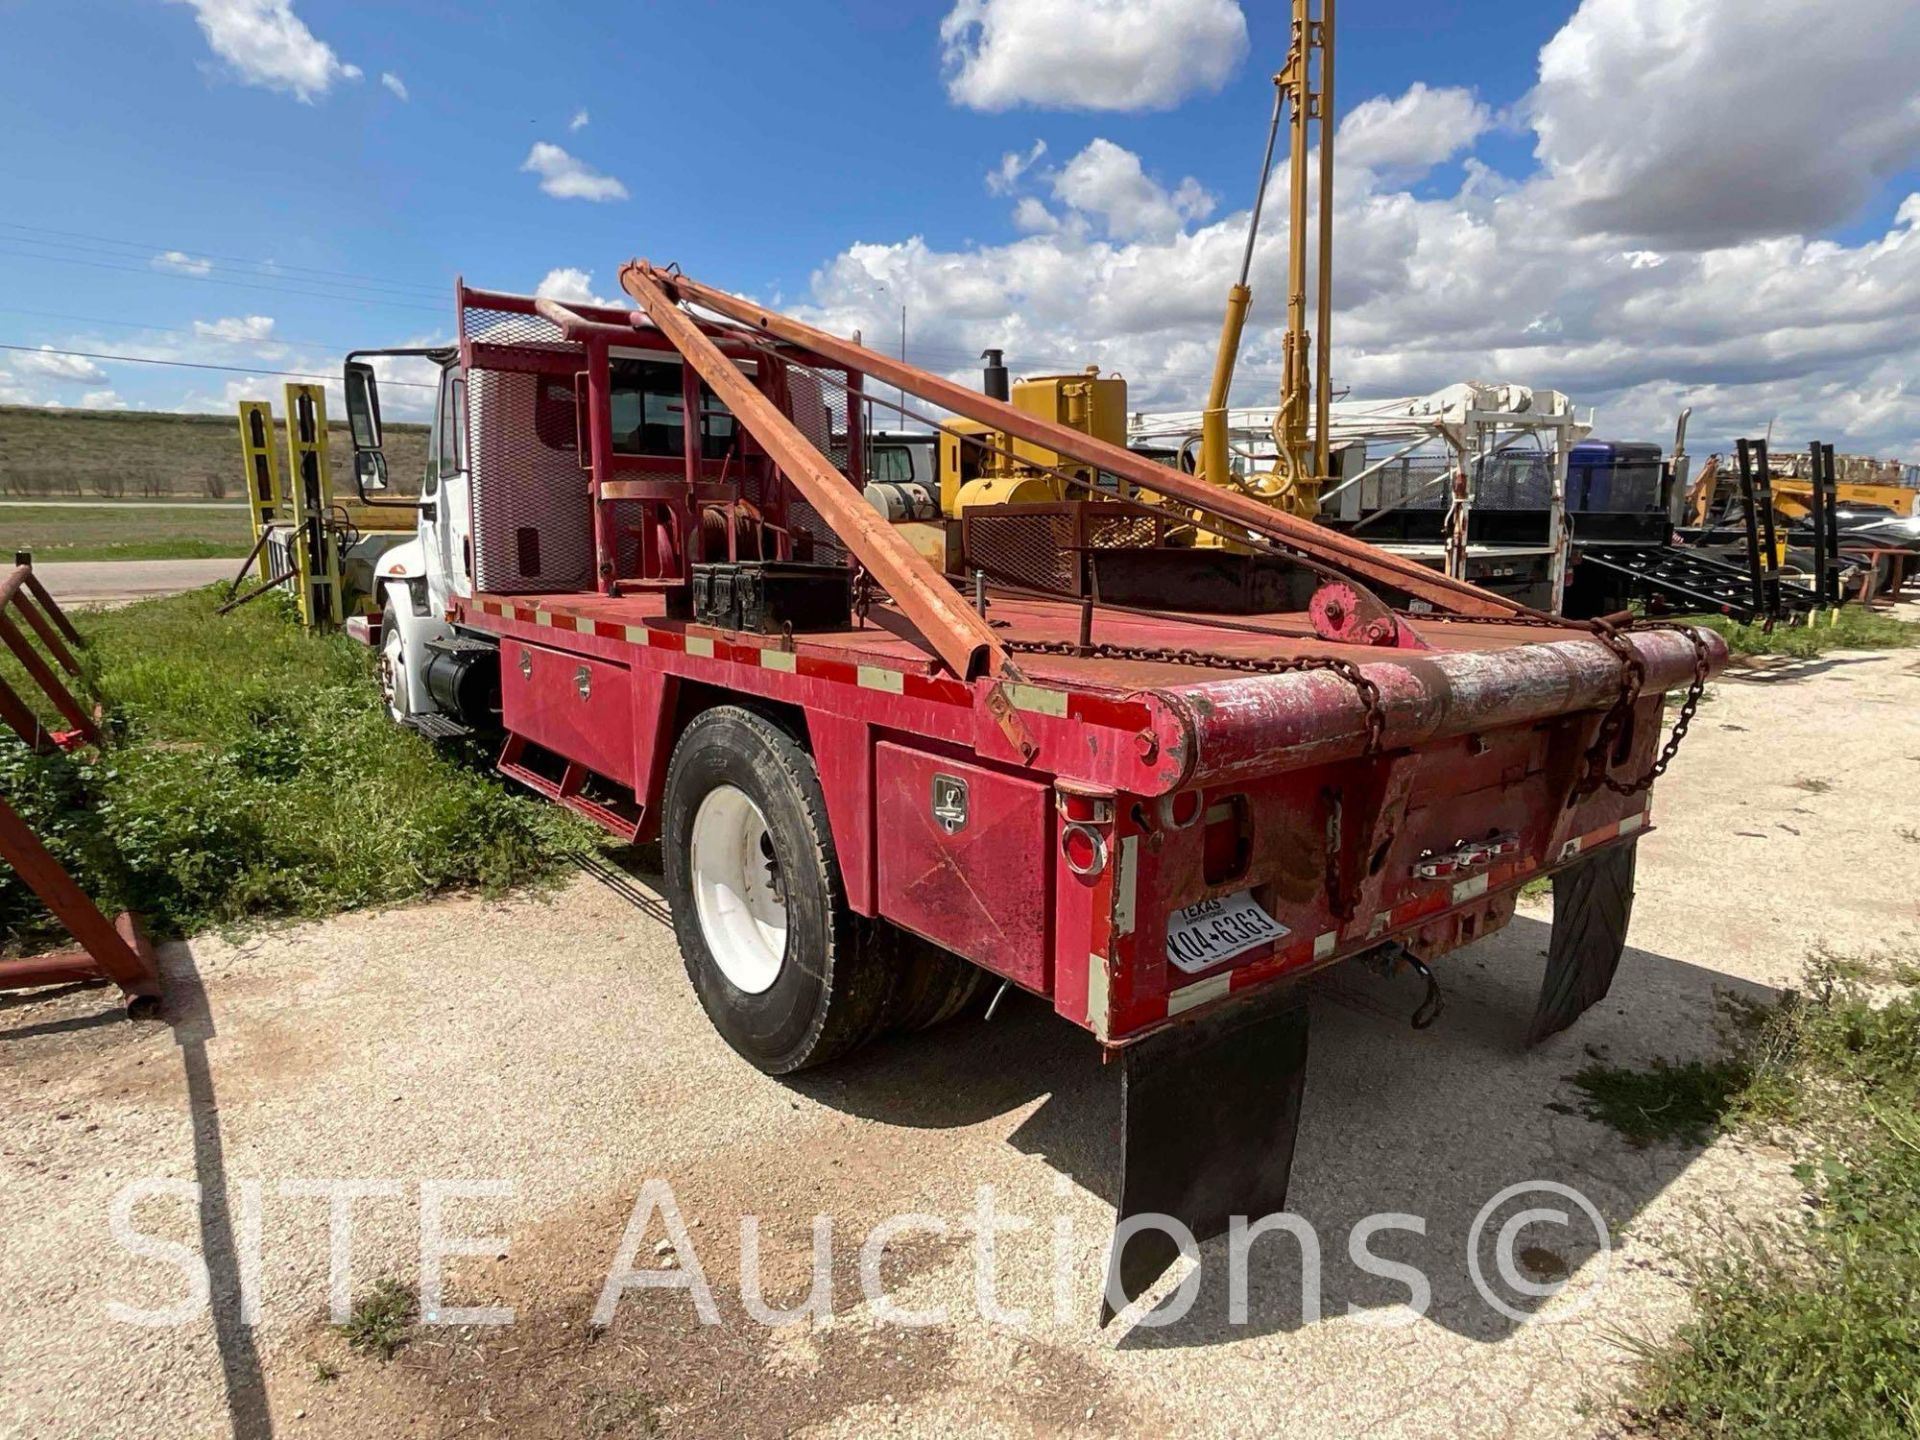 2005 International 4300 S/A Gin Pole Truck - Image 4 of 18